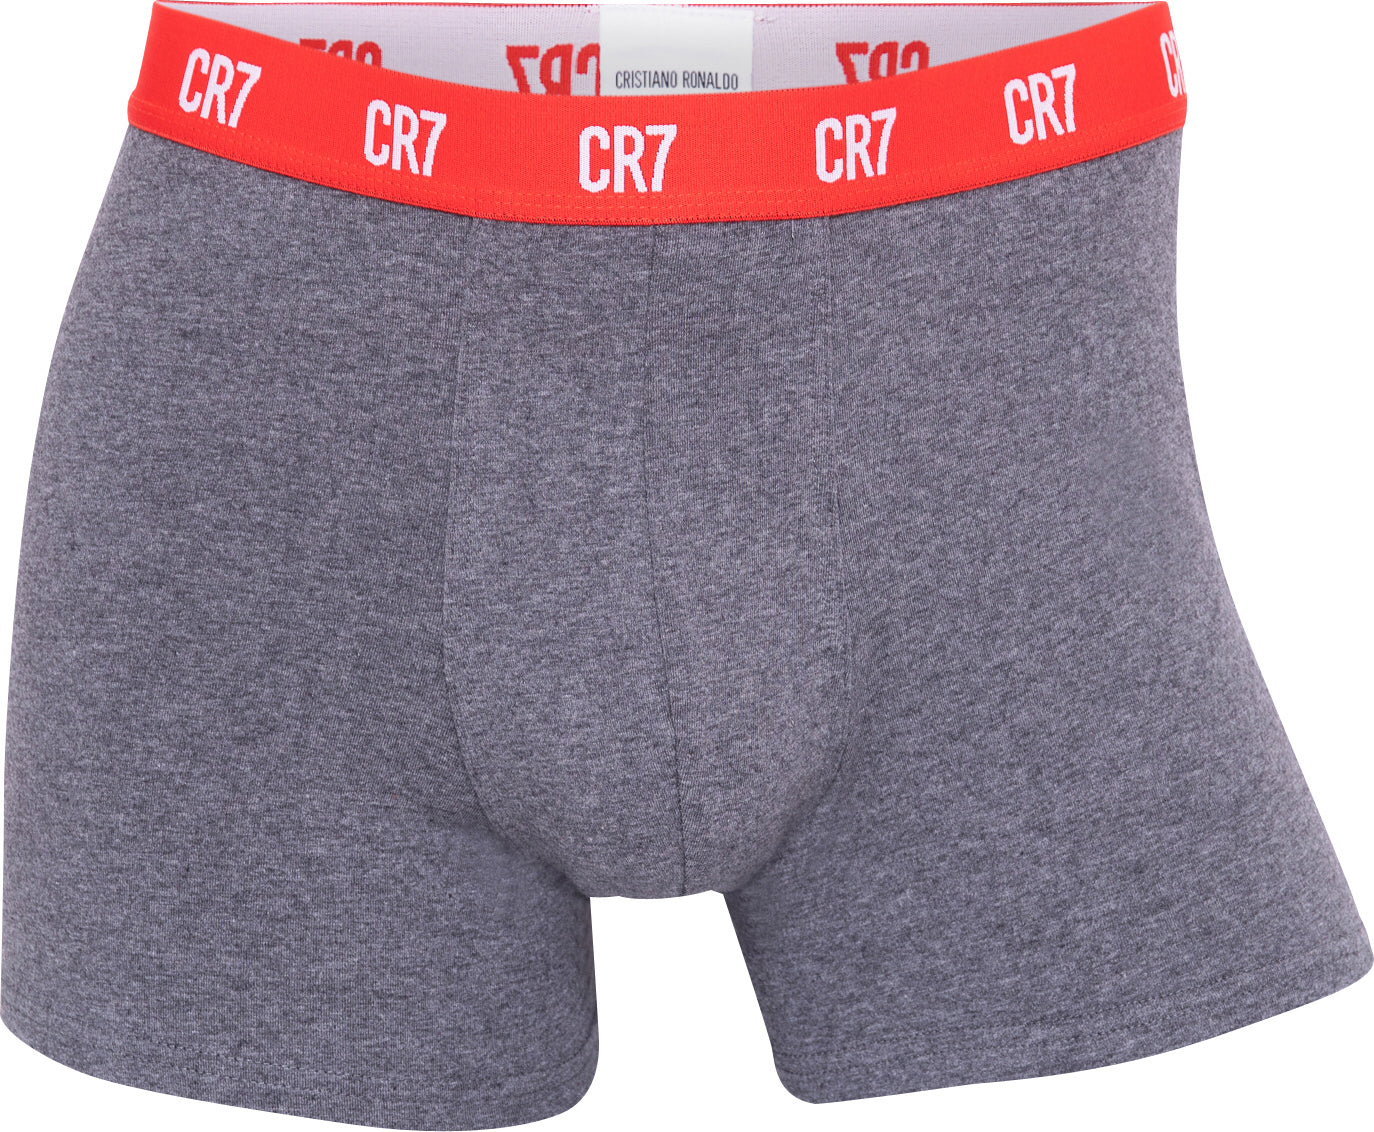 CR7-Boxers Man in Organic Cotton PACK of 3 units, Assorted, Gray-Black –  Underwear-Zone